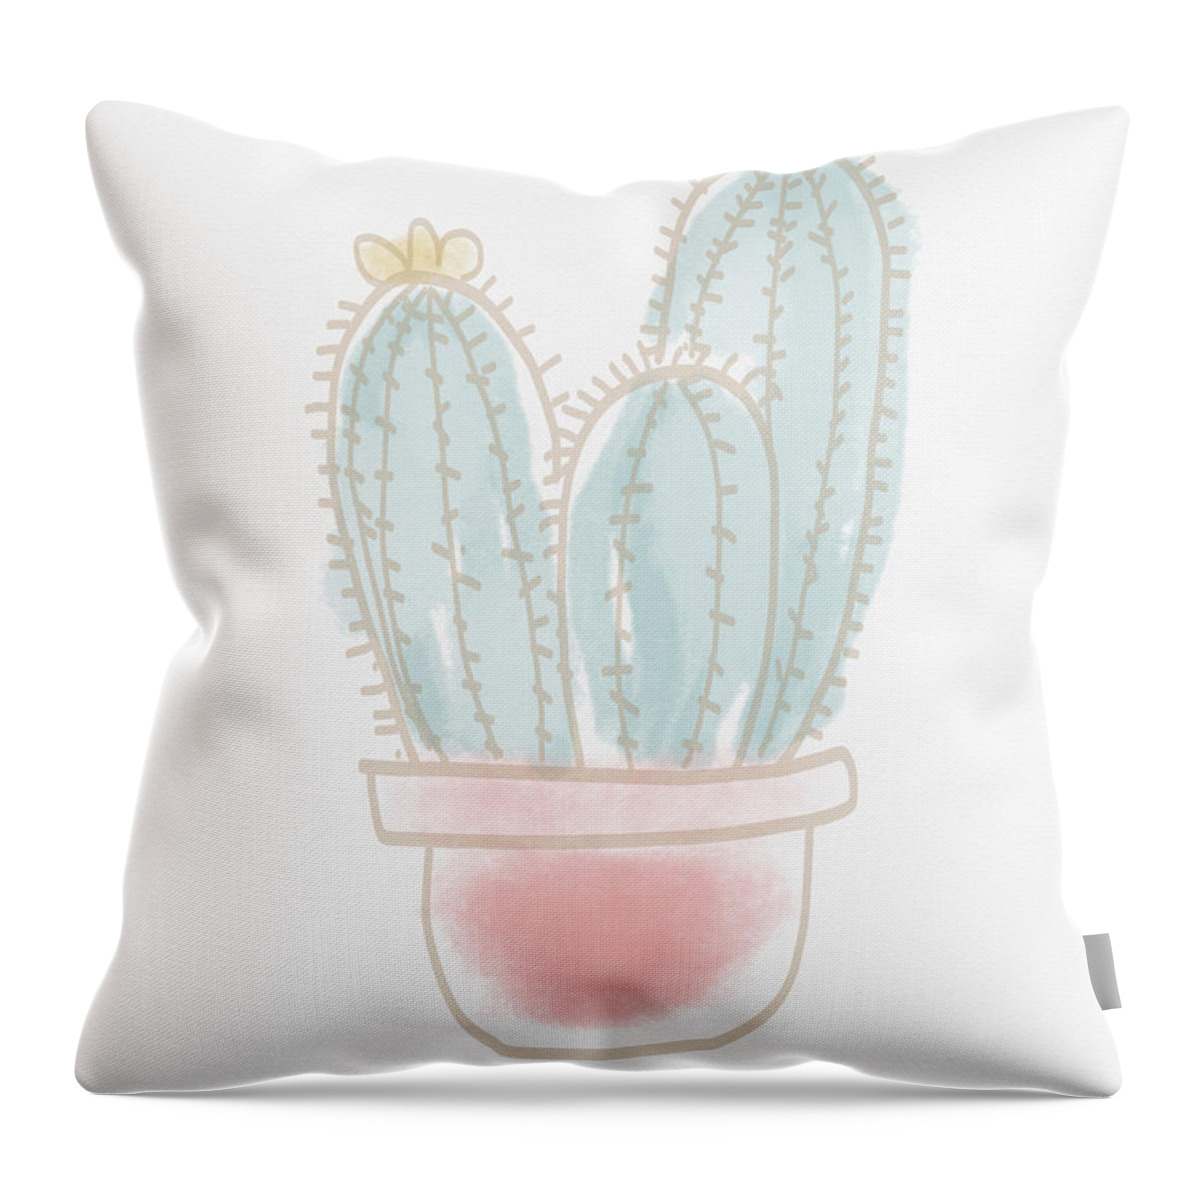 Cactus Throw Pillow featuring the painting Watercolor Cactus- Art by Linda Woods by Linda Woods